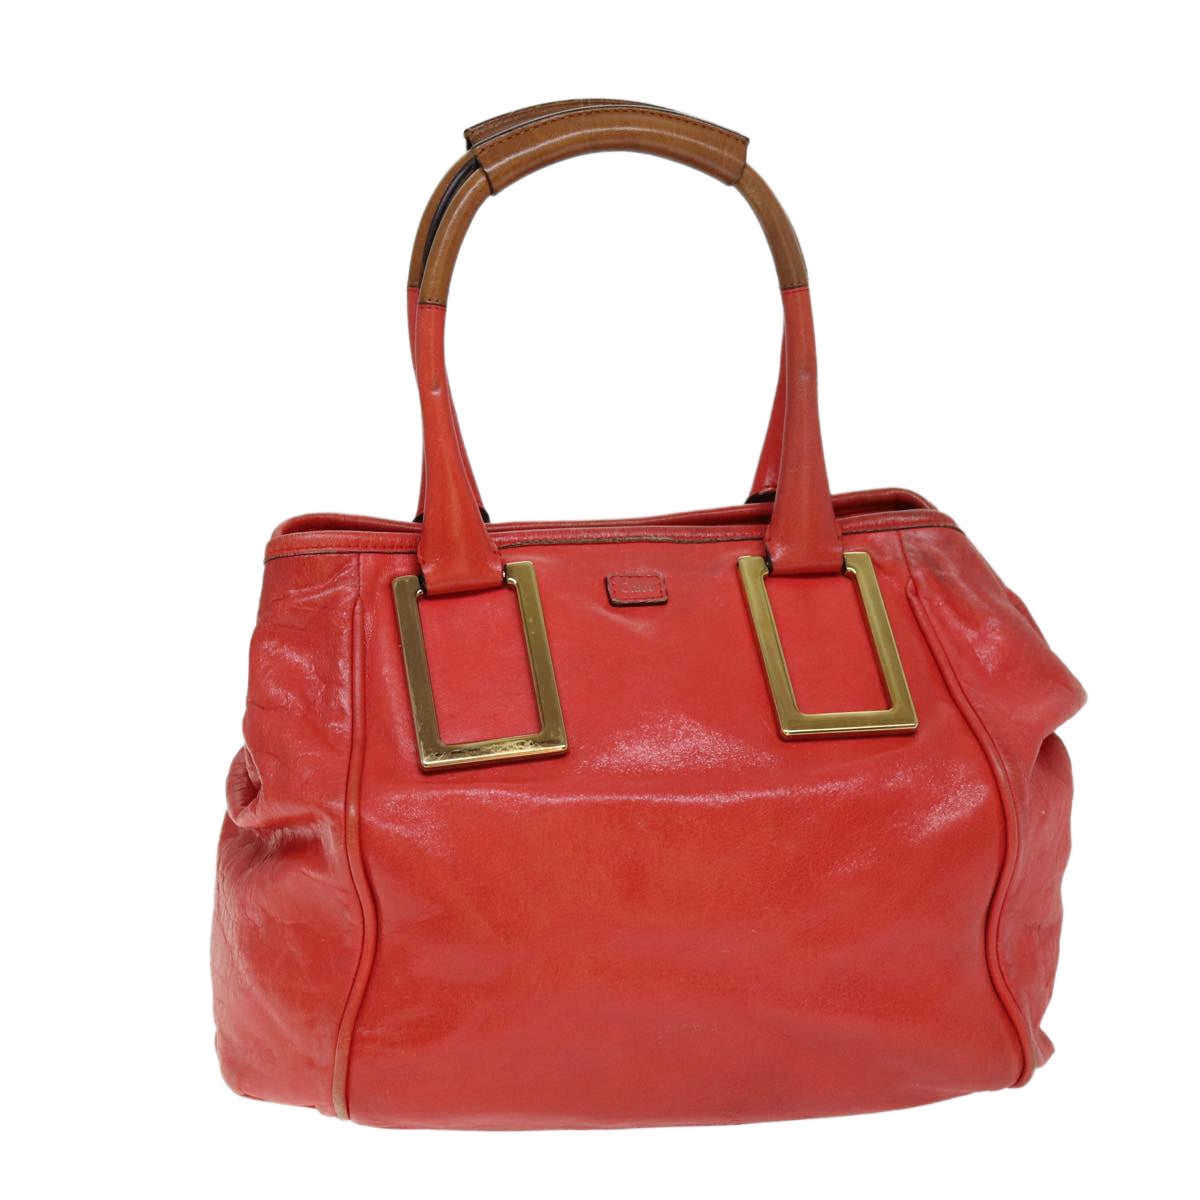 Chloe Etel Hand Bag Leather Red Auth yk12587